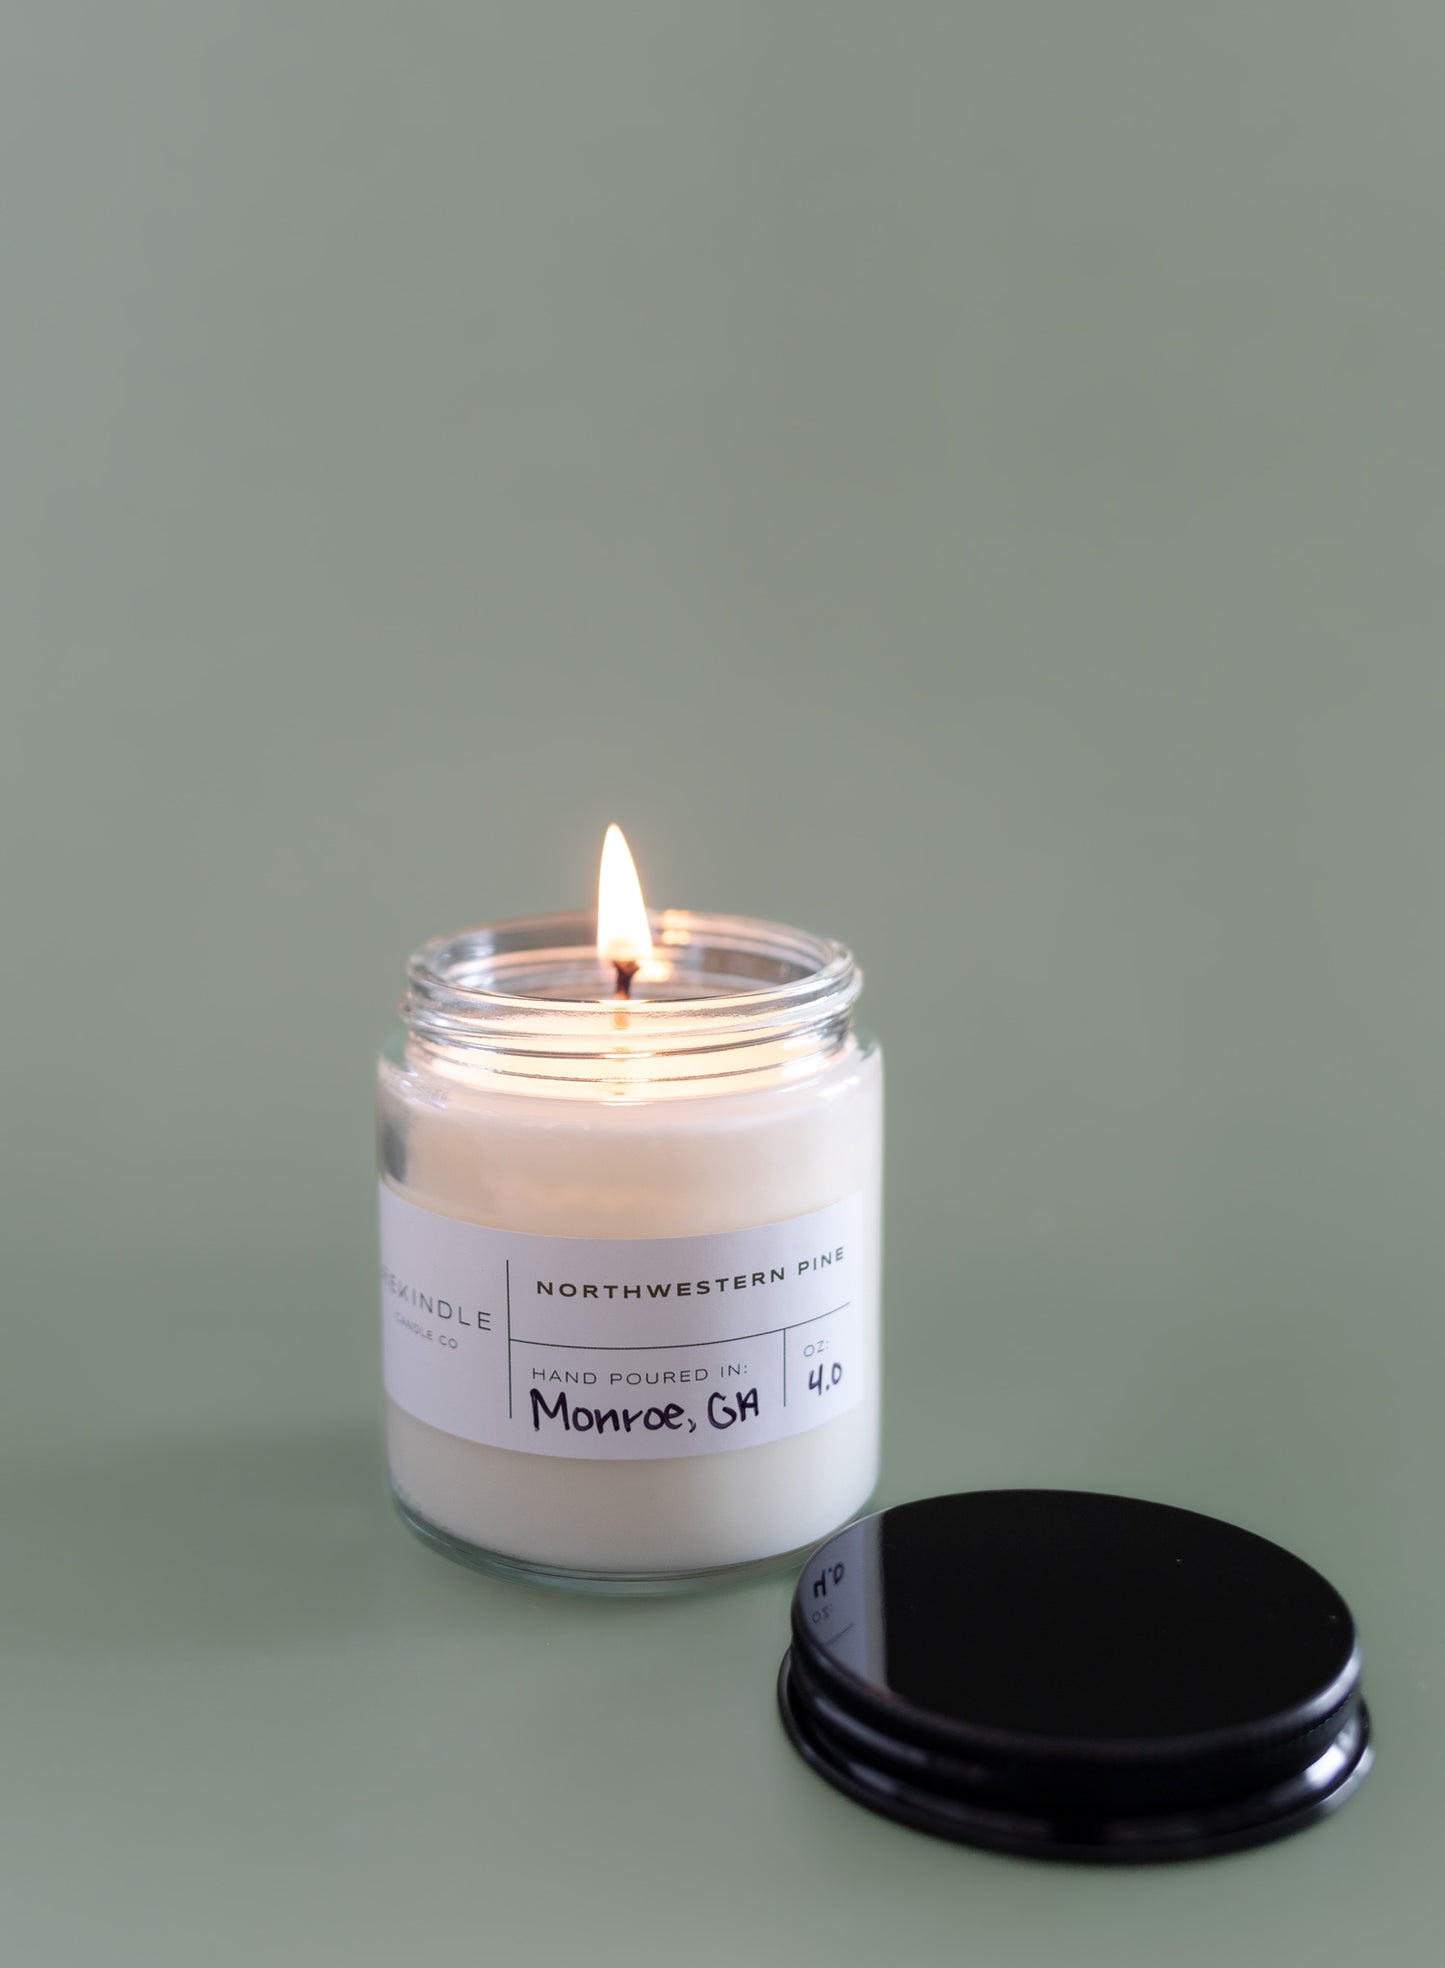 Northwestern Pine Cotton Wick Soy Candle